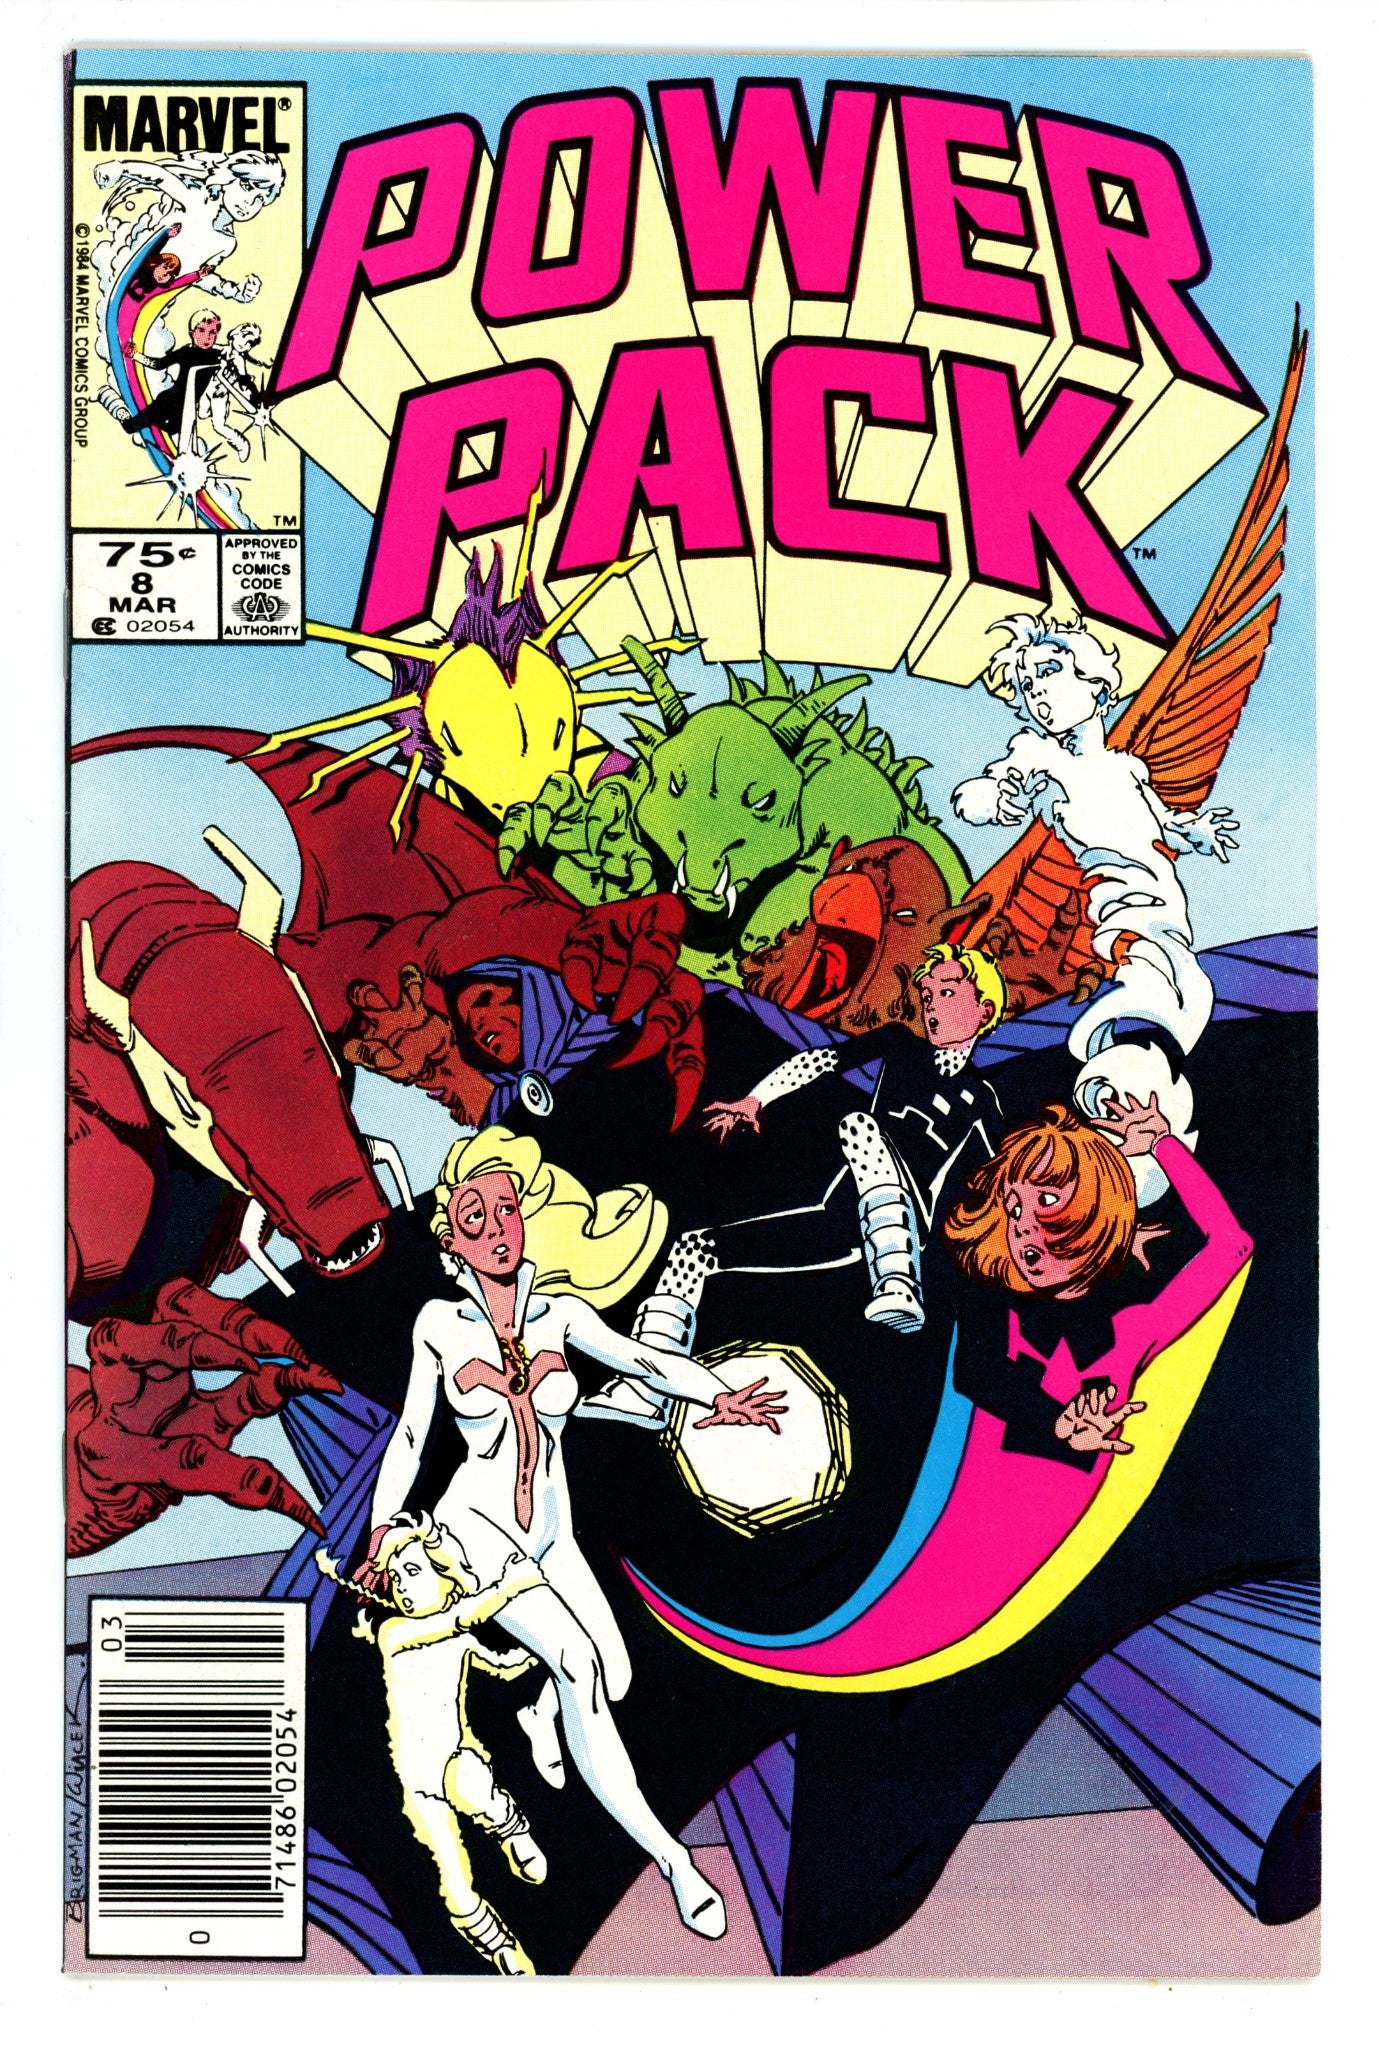 Power Pack Vol 1 8 VF- (7.5) (1985) Canadian Price Variant 